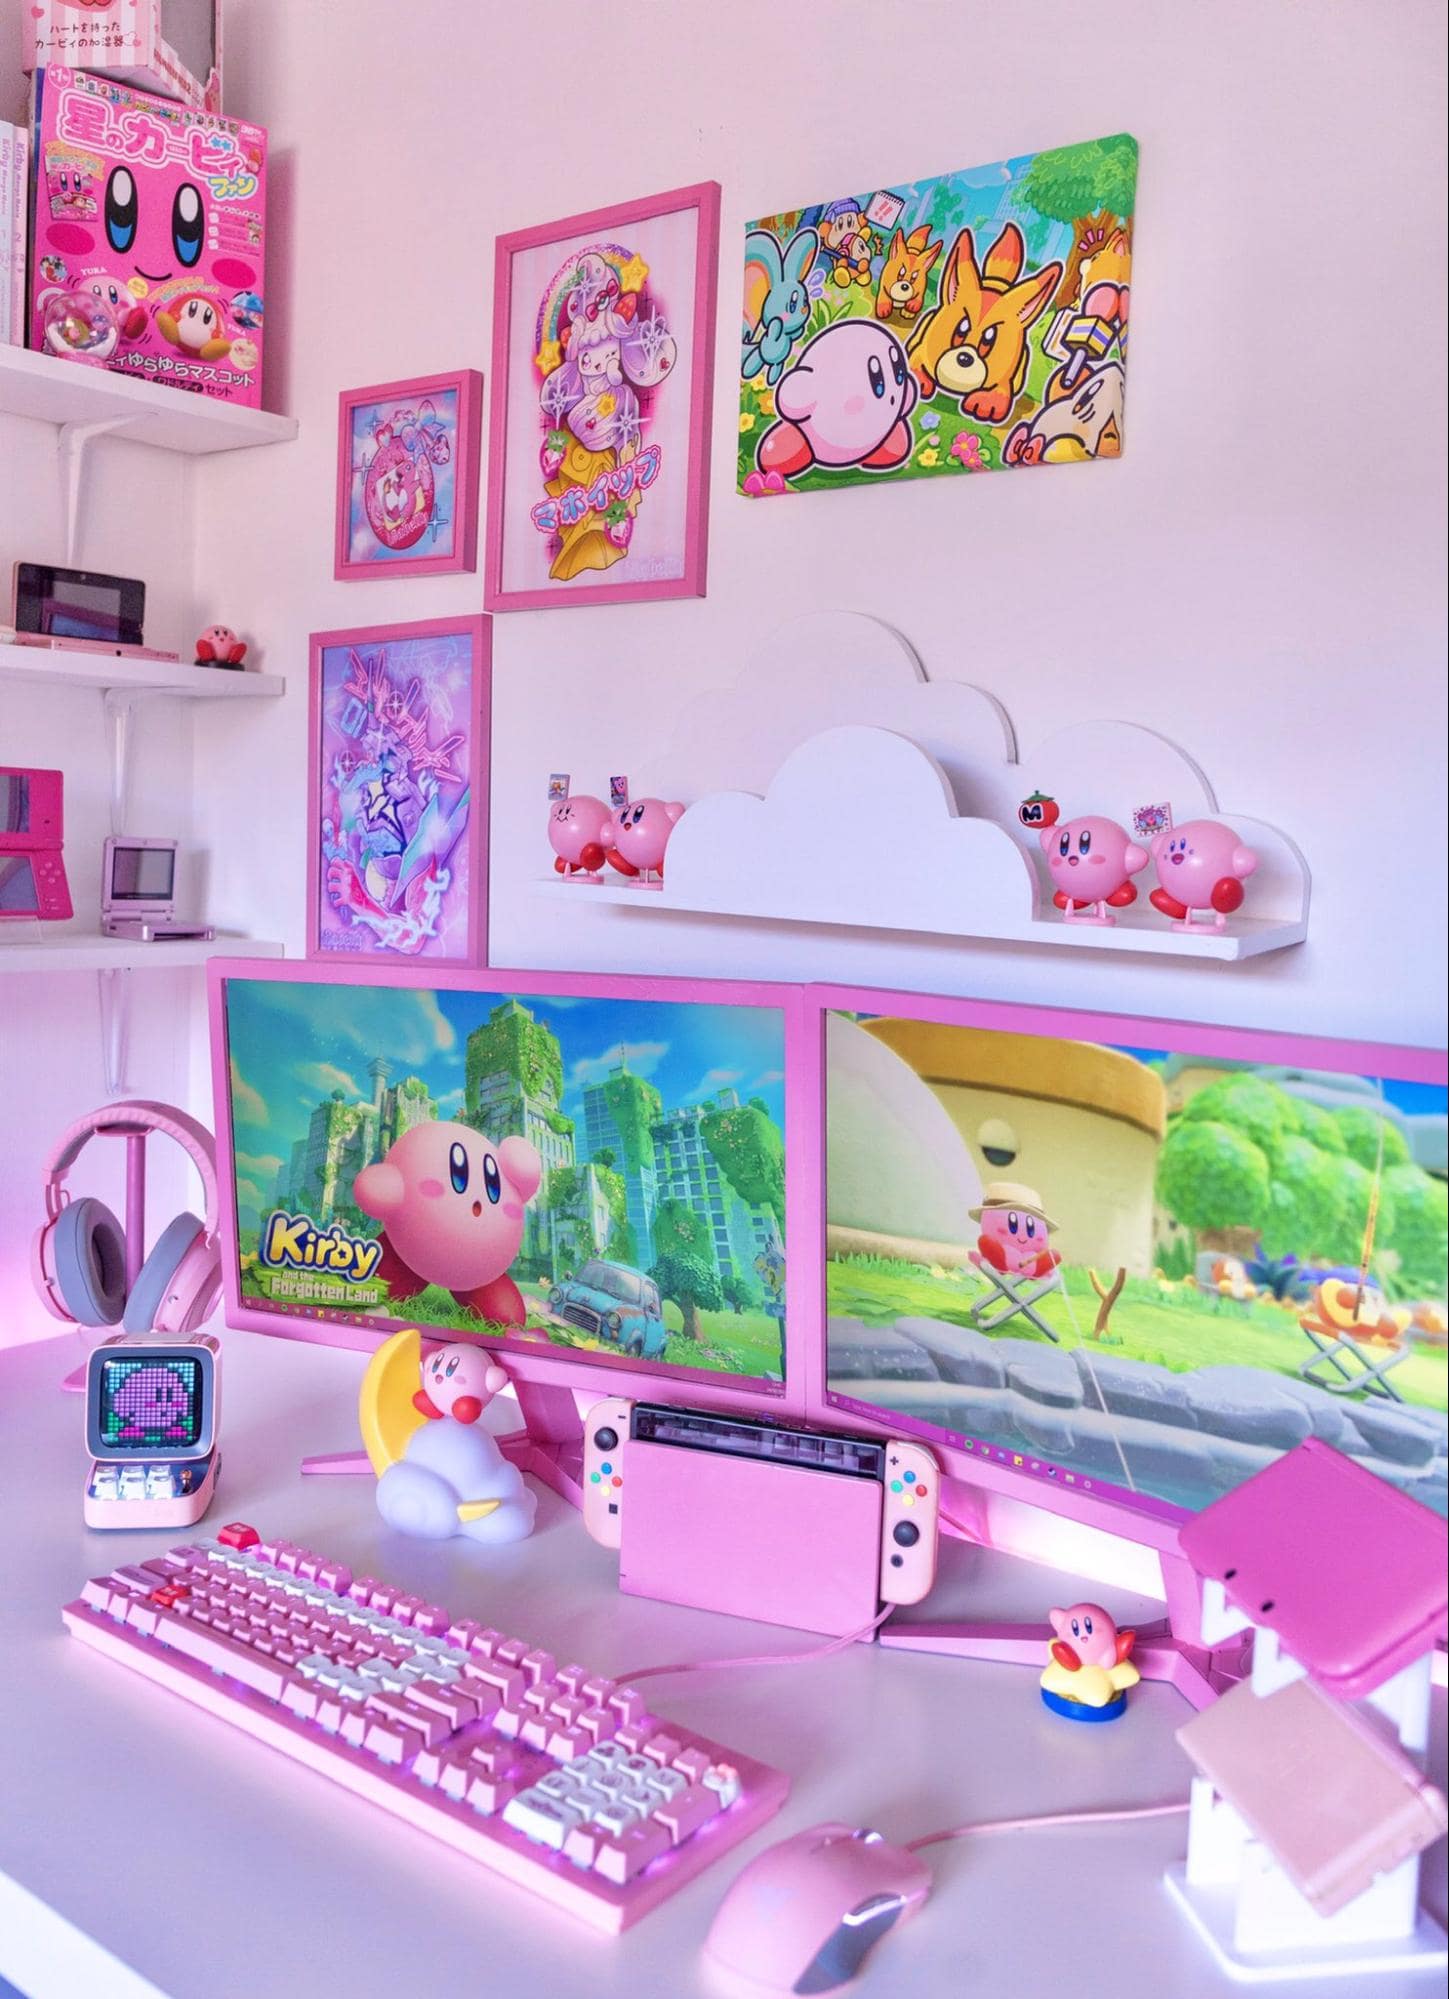 A pink gaming desk setup inspired by the Kirby video games